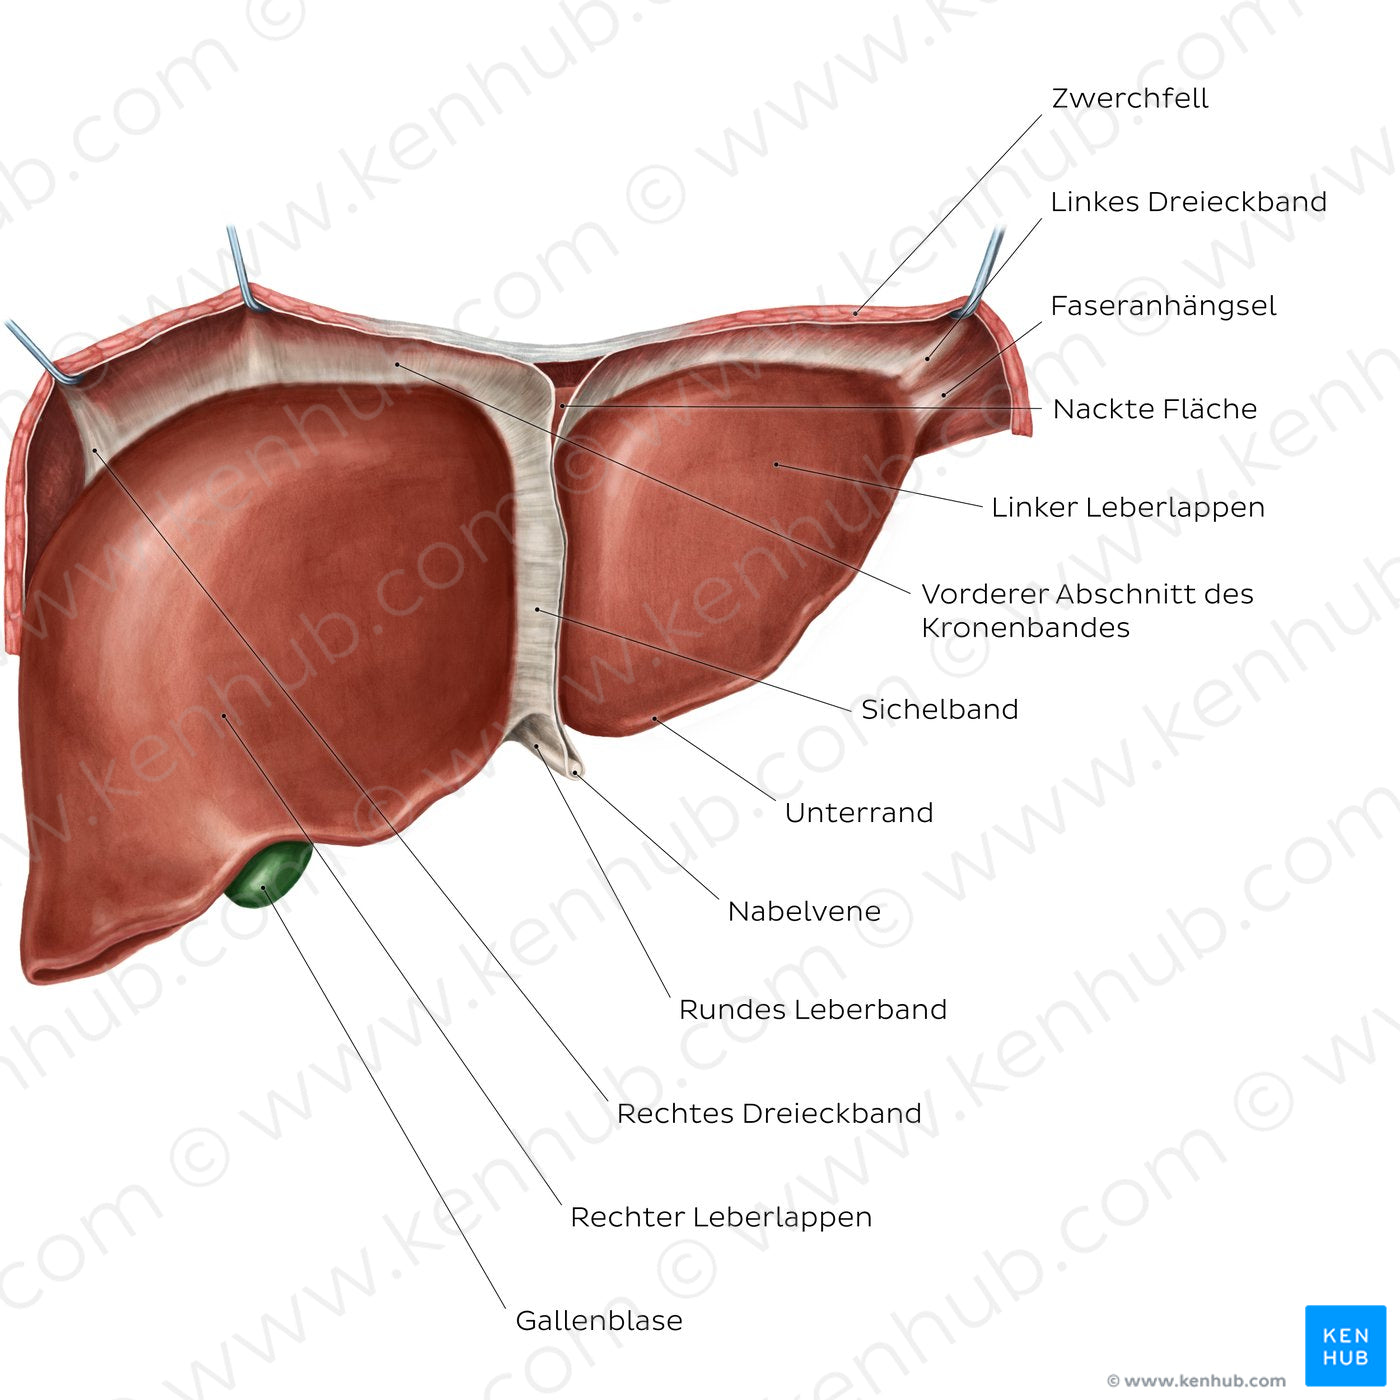 Anterior view of the liver (German)